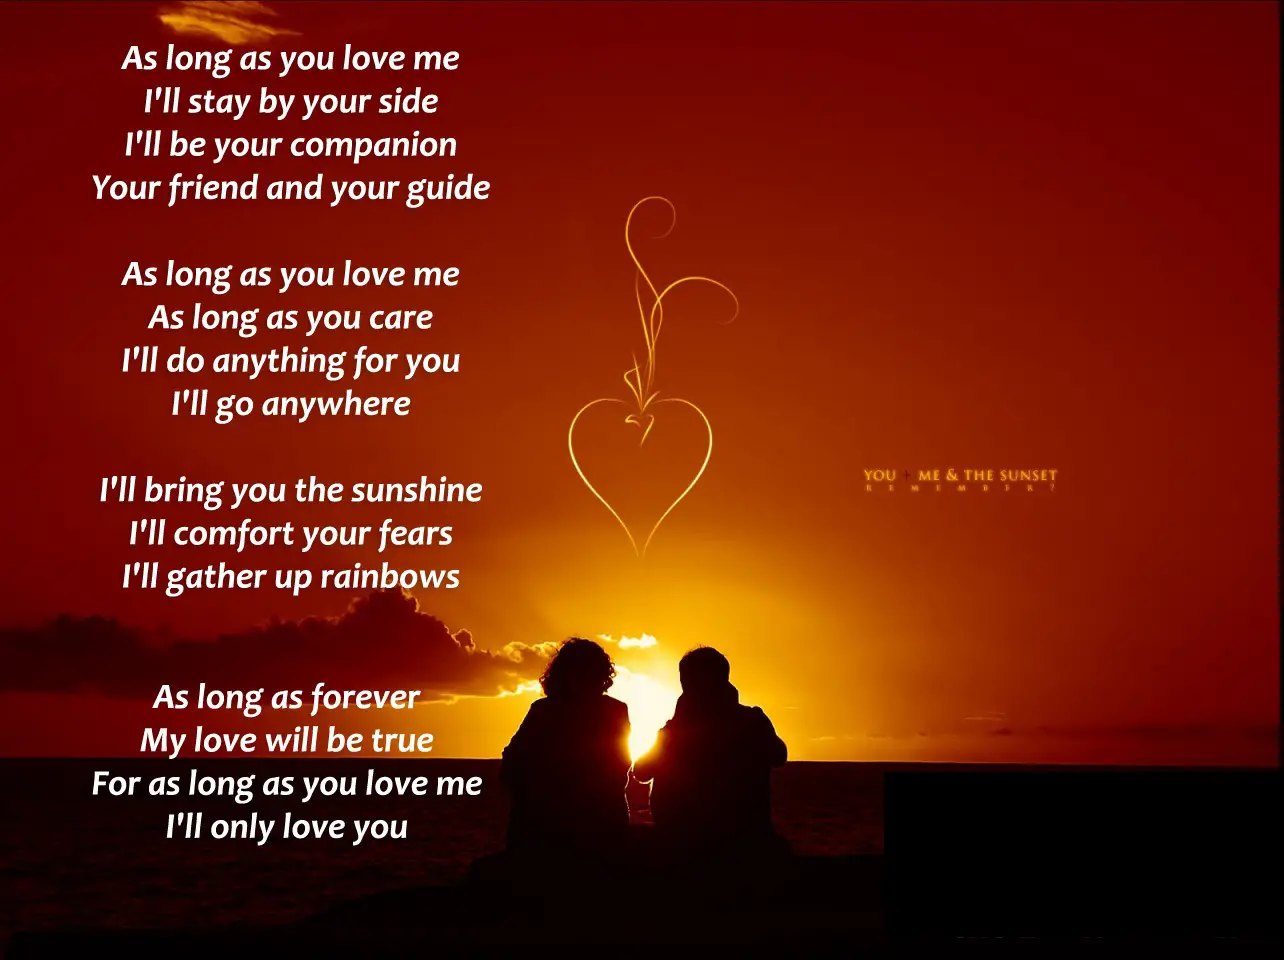 Love poetry for boyfriends are for those special times when you need poetry to ex...